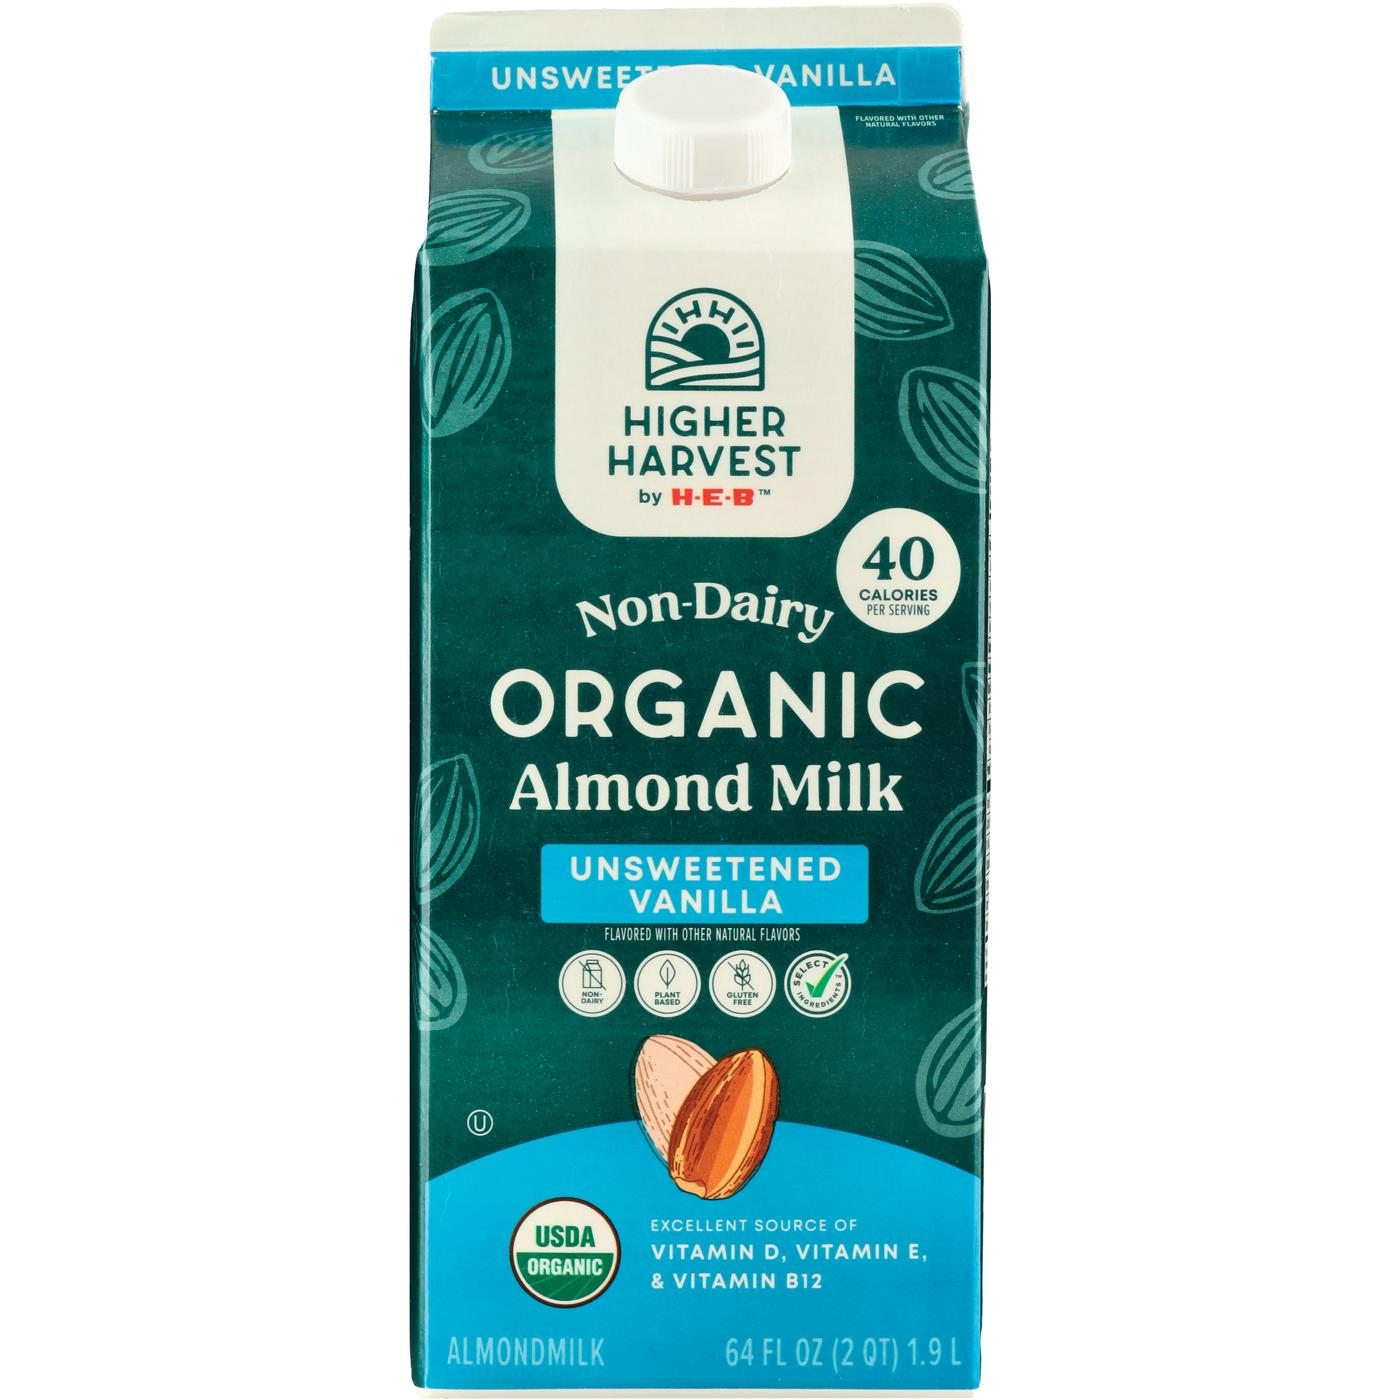 Higher Harvest by H-E-B Organic Non-Dairy Almond Milk – Unsweetened Vanilla; image 1 of 2